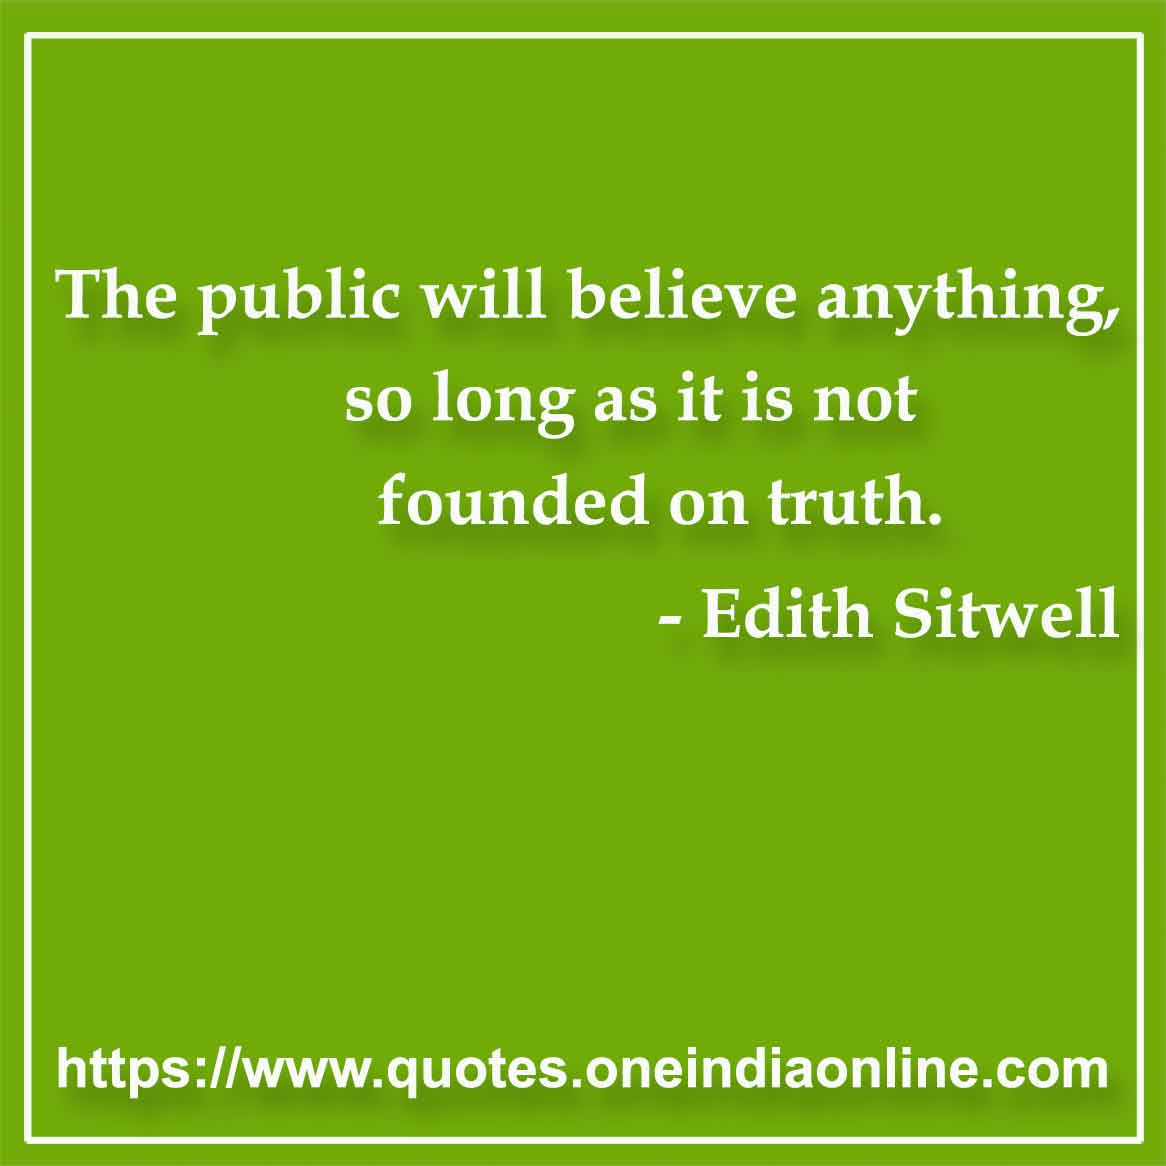 The public will believe anything, so long as it is not founded on truth.

- Belief Quote by Edith Sitwell